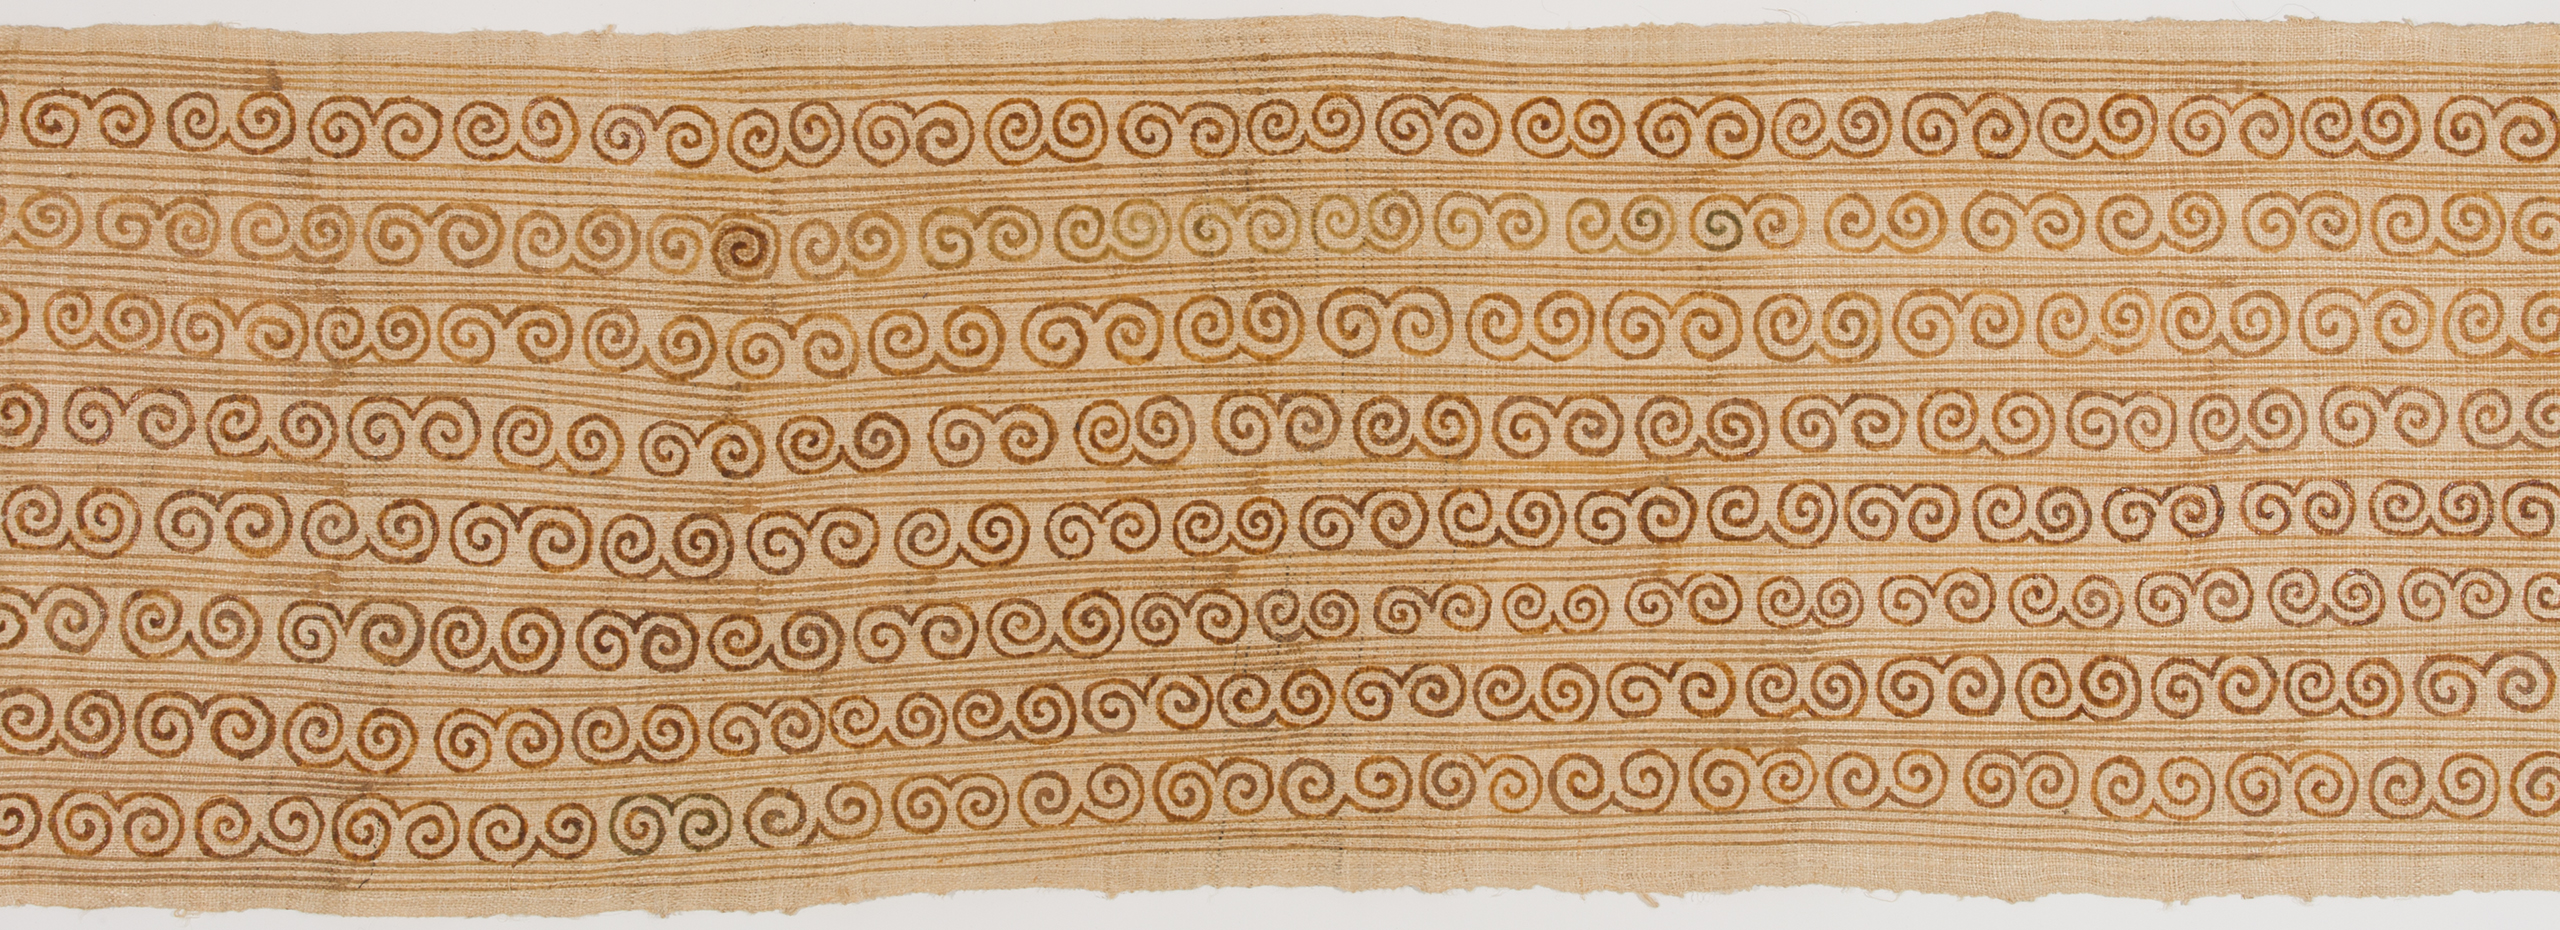 Portion of a horizontal light brown cloth with a darker brown pattern of curled and straight lines